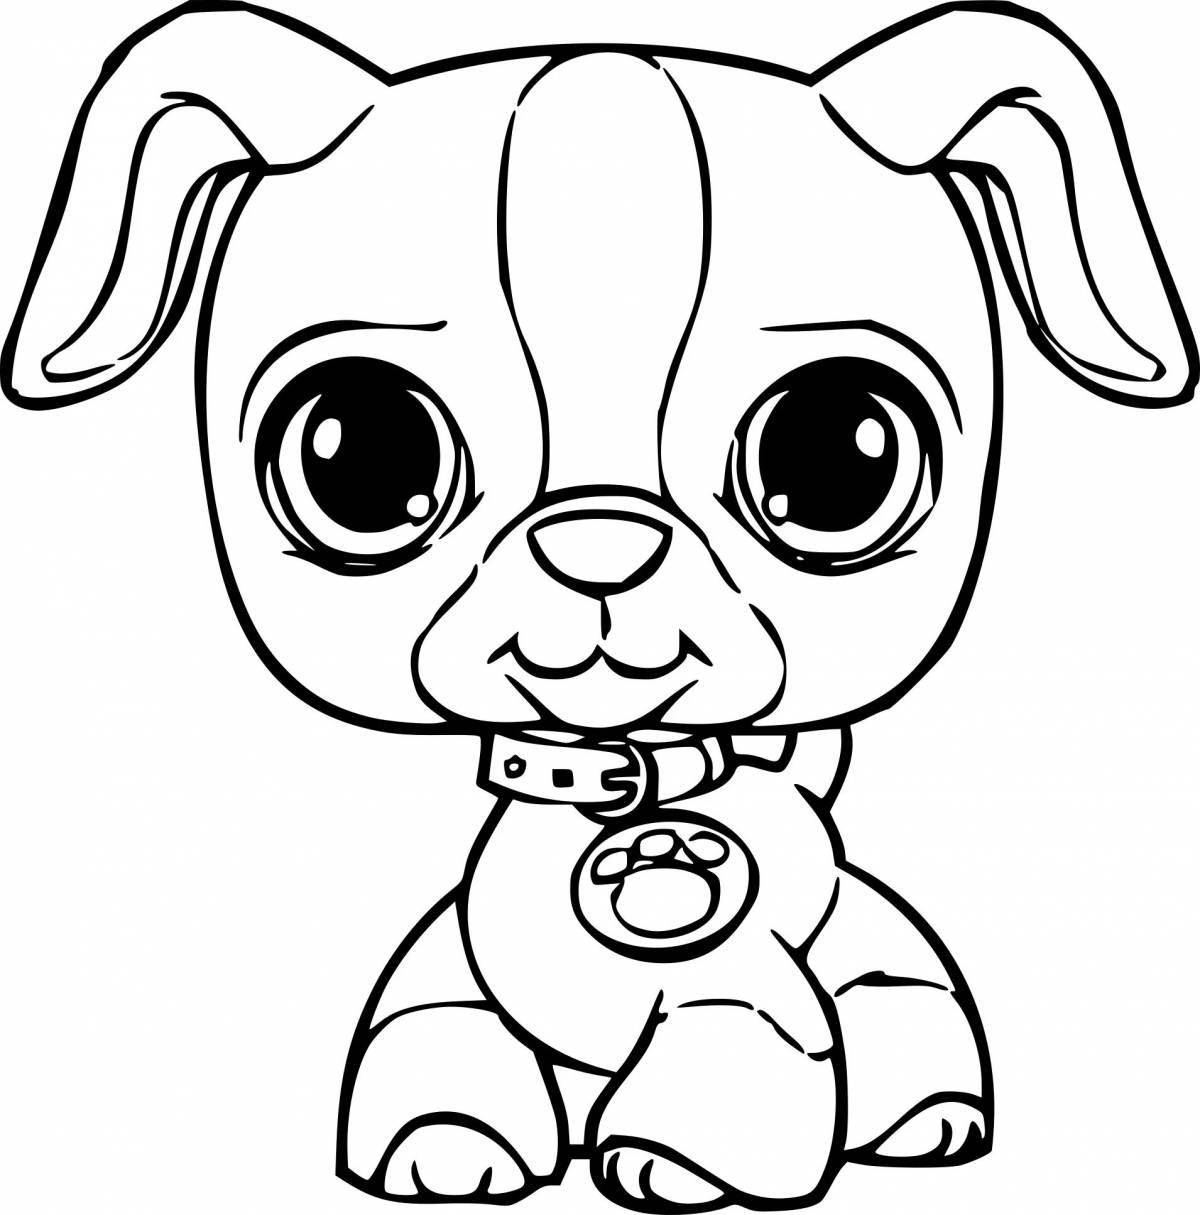 Gentle cute dog coloring for girls